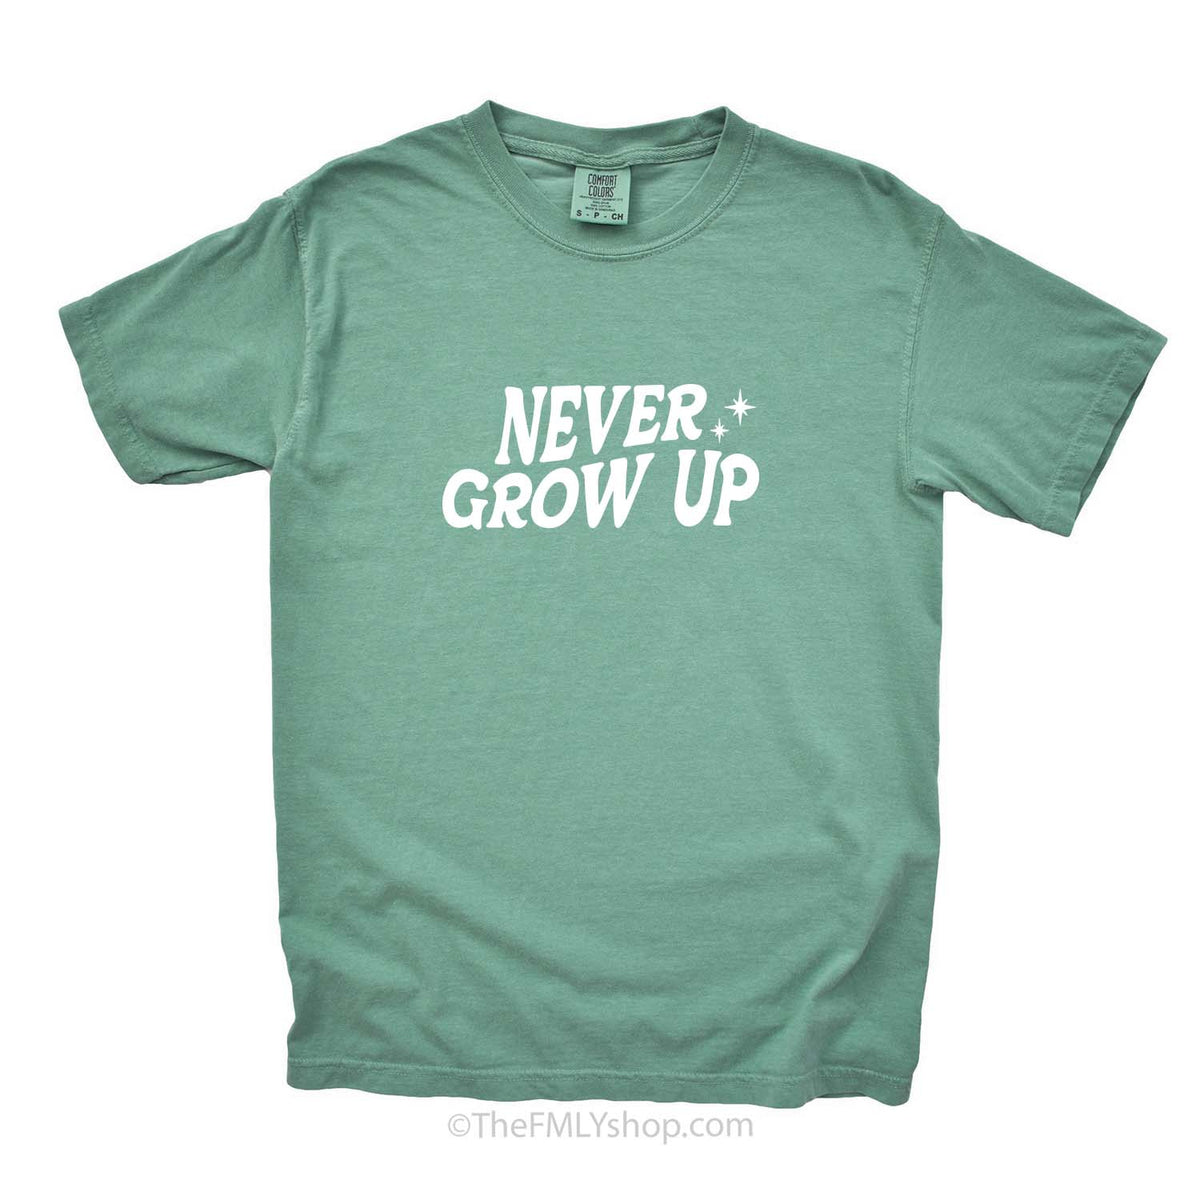 *RTS, Never Grow Up Tee, Size L